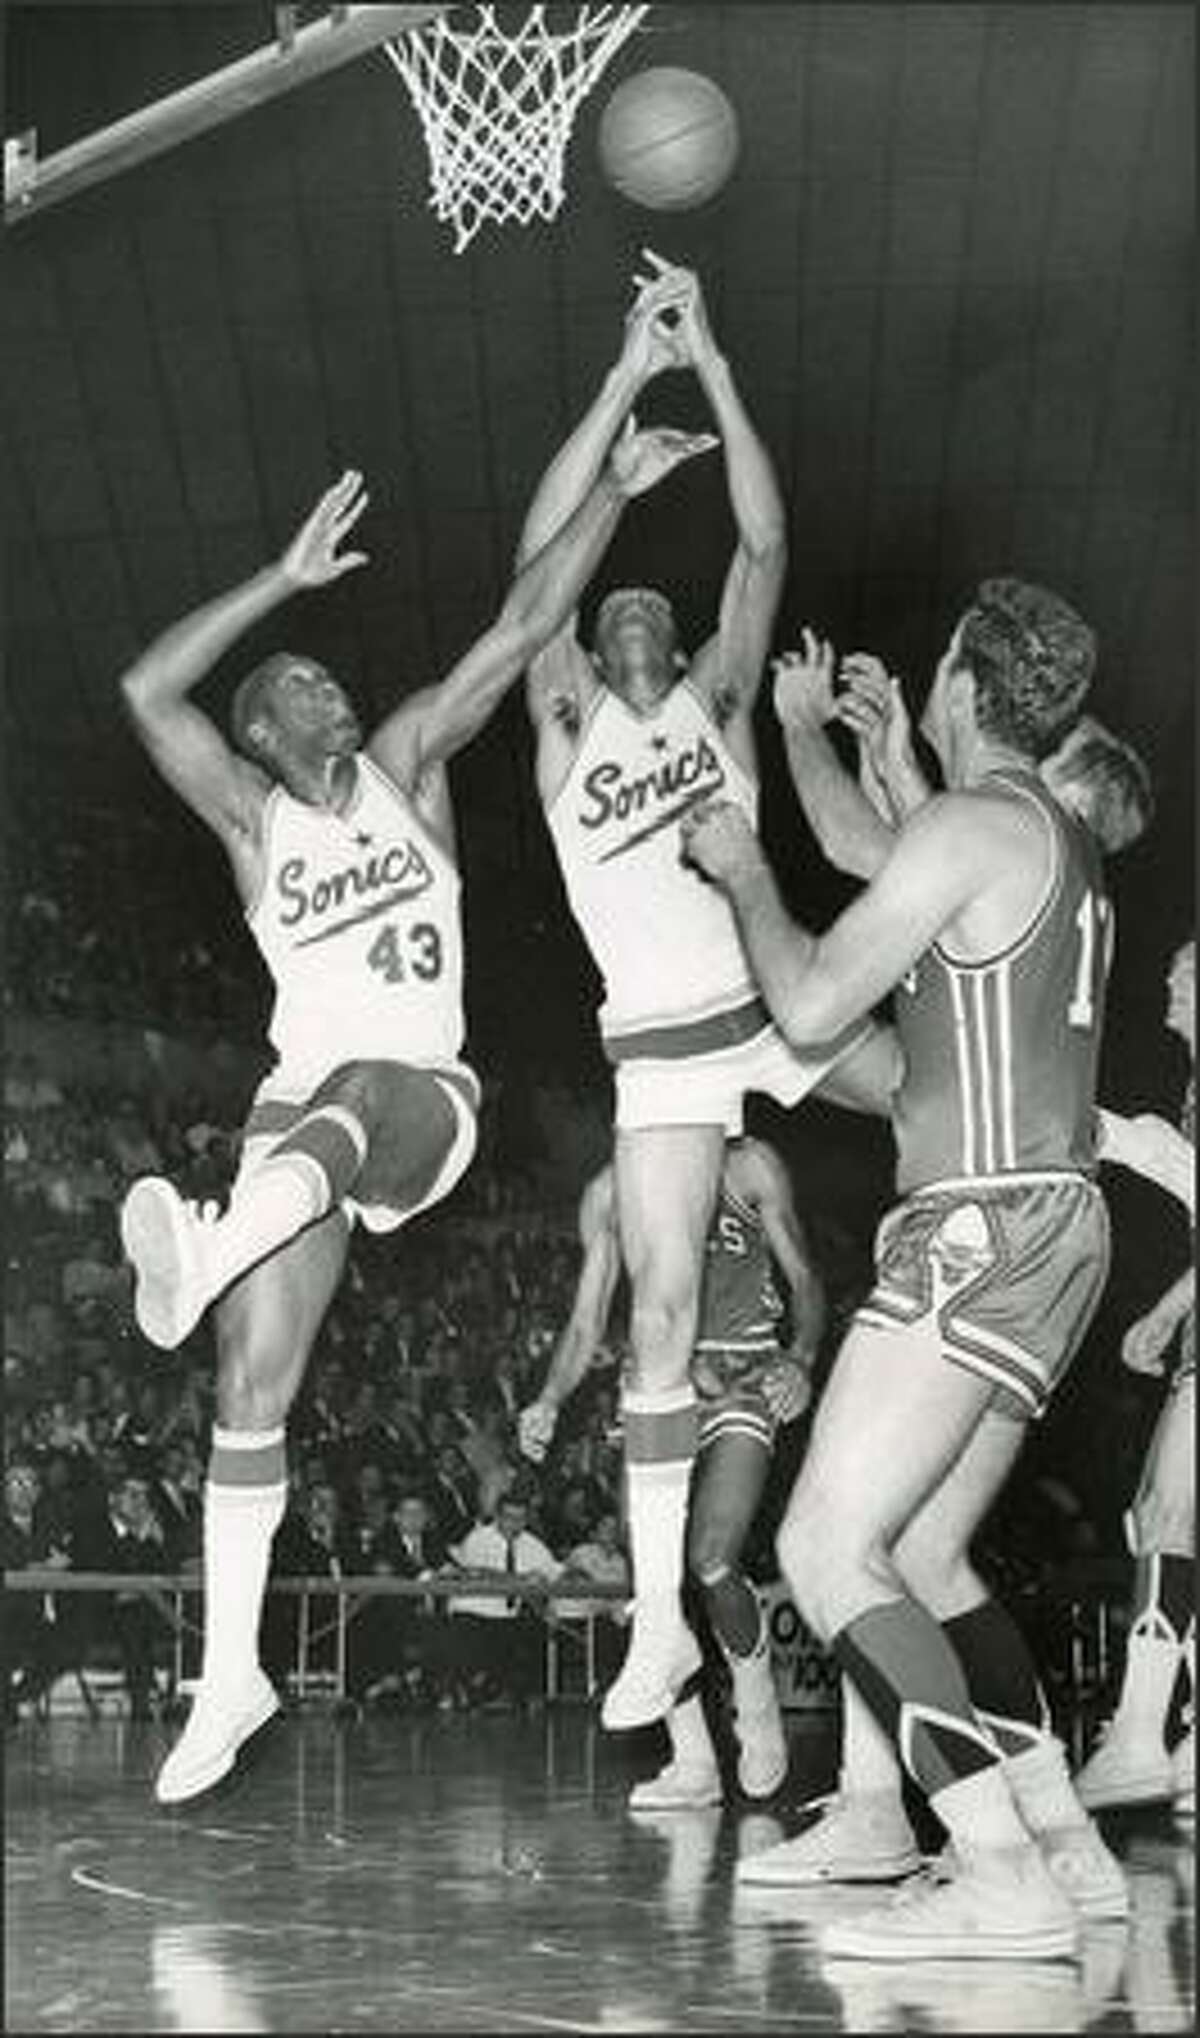 1967: Seattle Supersonics players Plummer Lott and Bob Rule go for a rebound against Chicago.